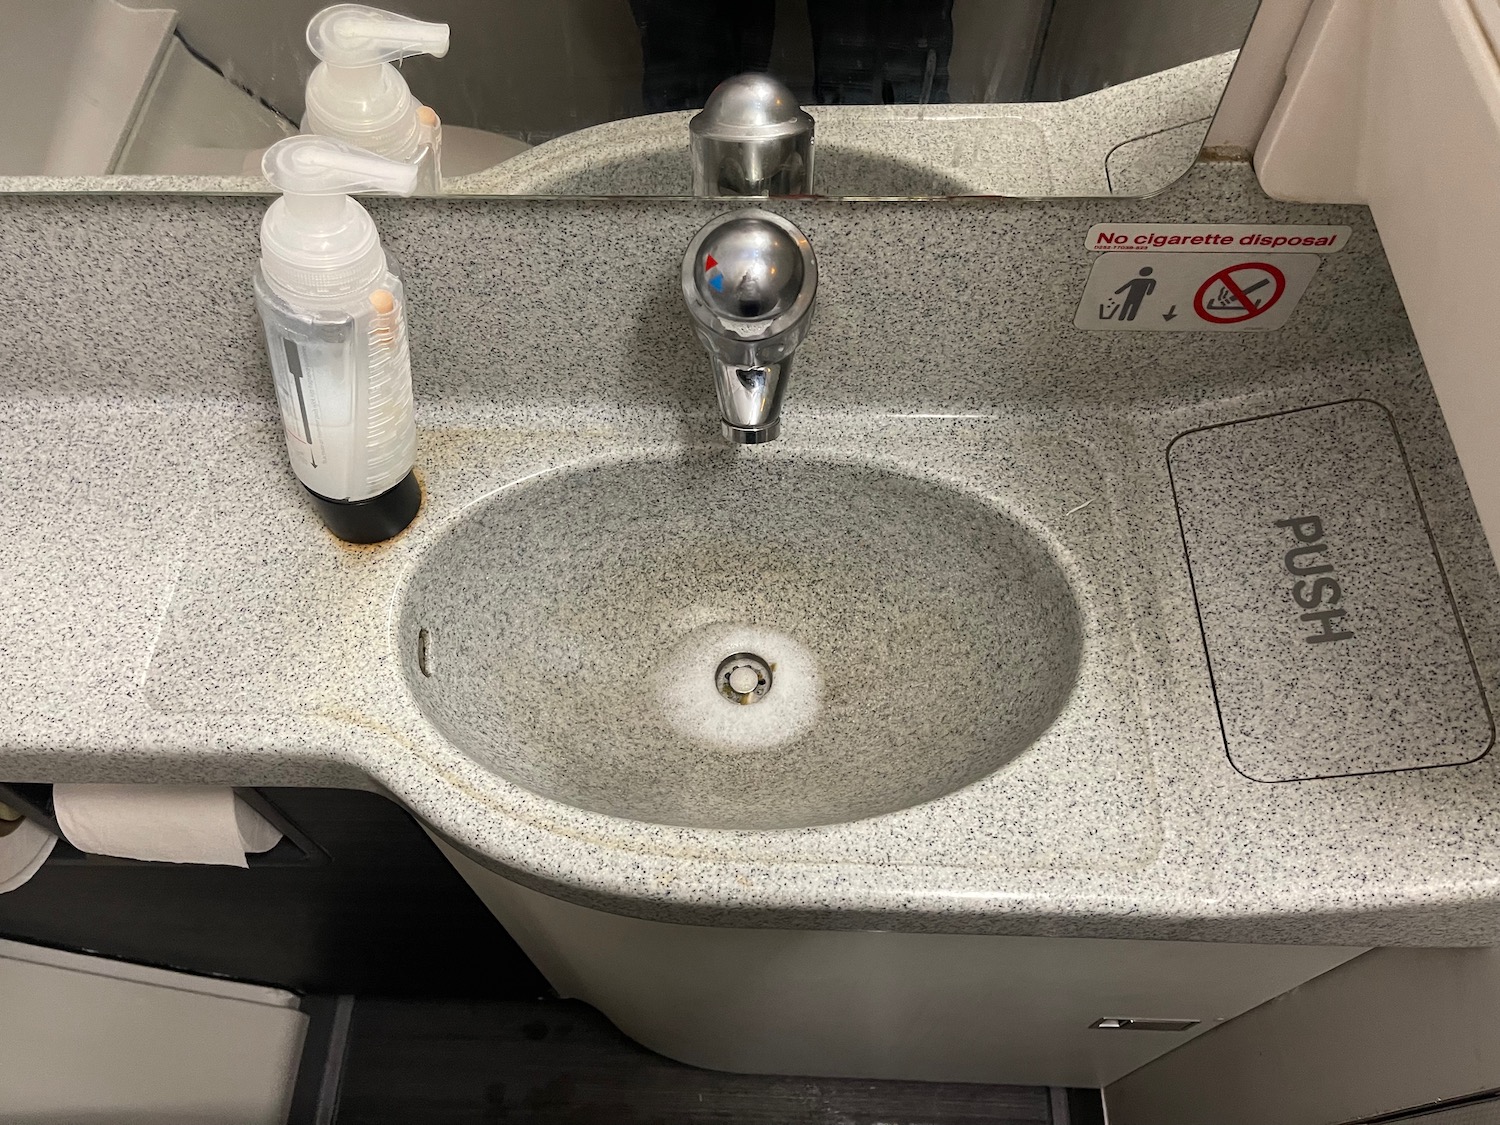 a sink with soap dispenser and bottle of liquid